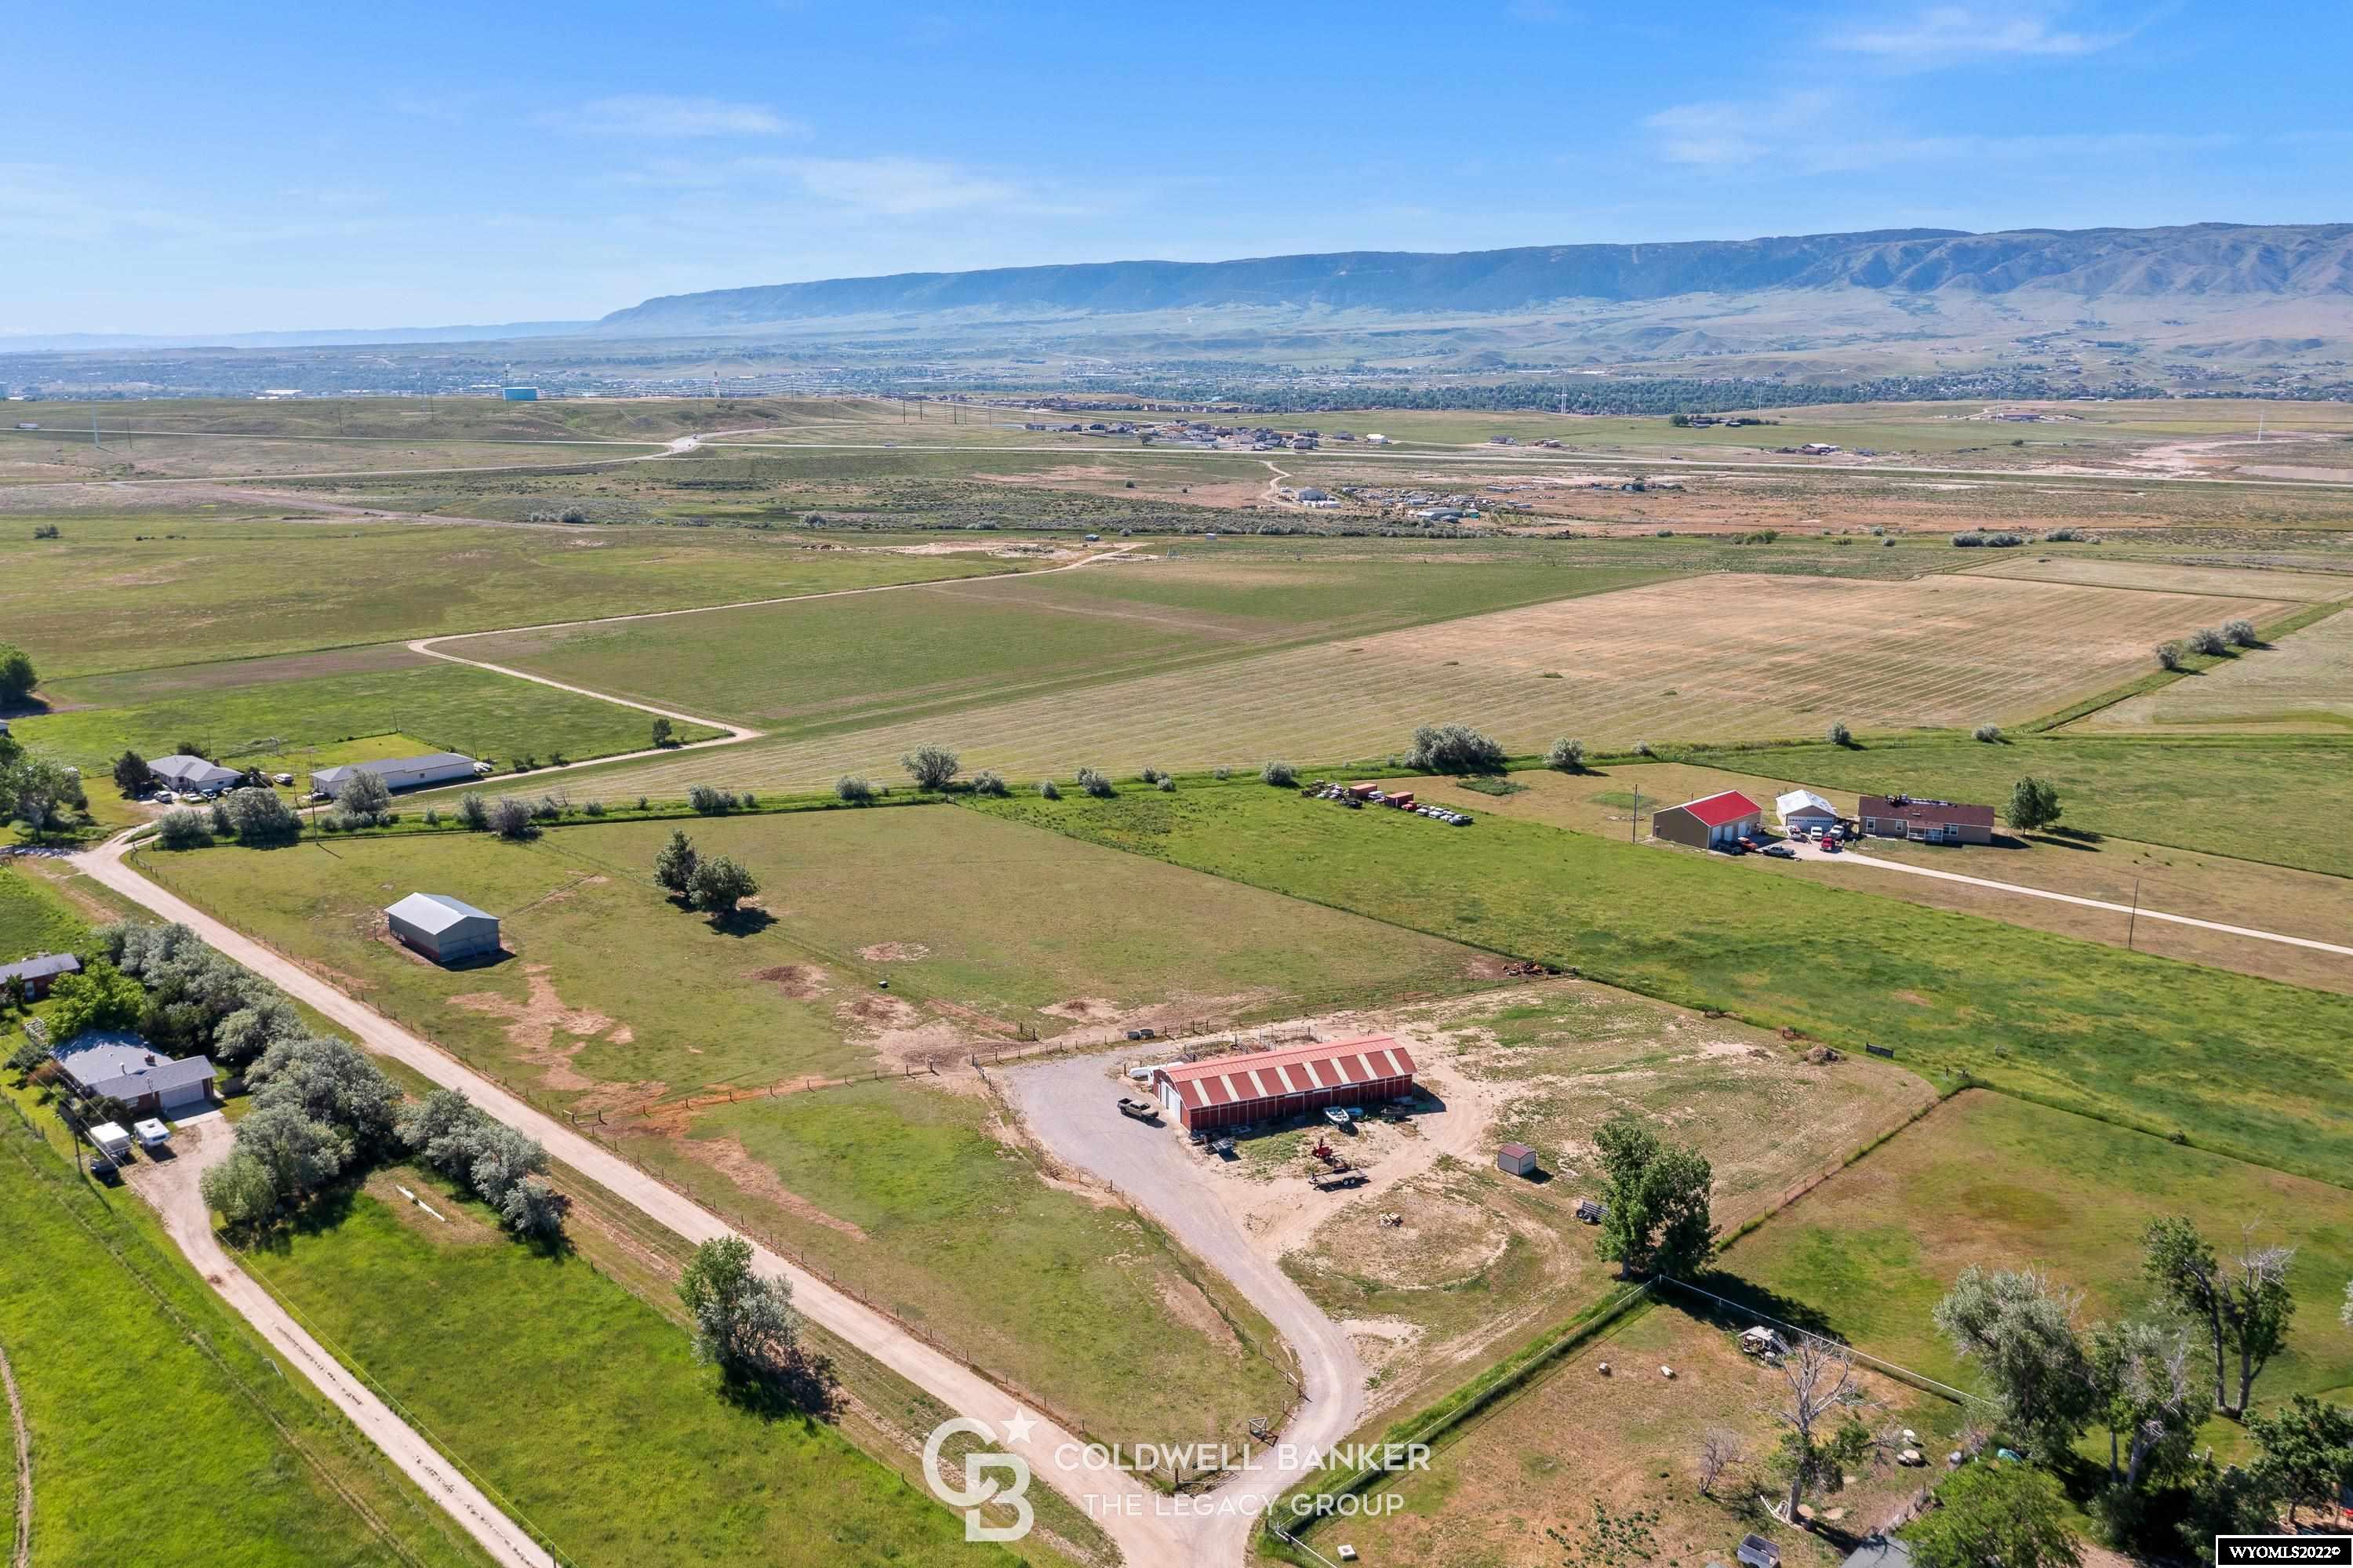 This property is in a superb location, excellent condition, and has enormous potential!  An exquisite building site located near town with expansive mountain views and privacy from any neighbors.  The parcel is currently under center pivot irrigation producing grass and alfalfa hay.  The 42'x108' barn features 8 fully equipped horse stalls, two hay lofts, and a large tack room.  The property could also be developed into separate residential lots and has 4 water taps available.  Call Quinn at 307.399.0744